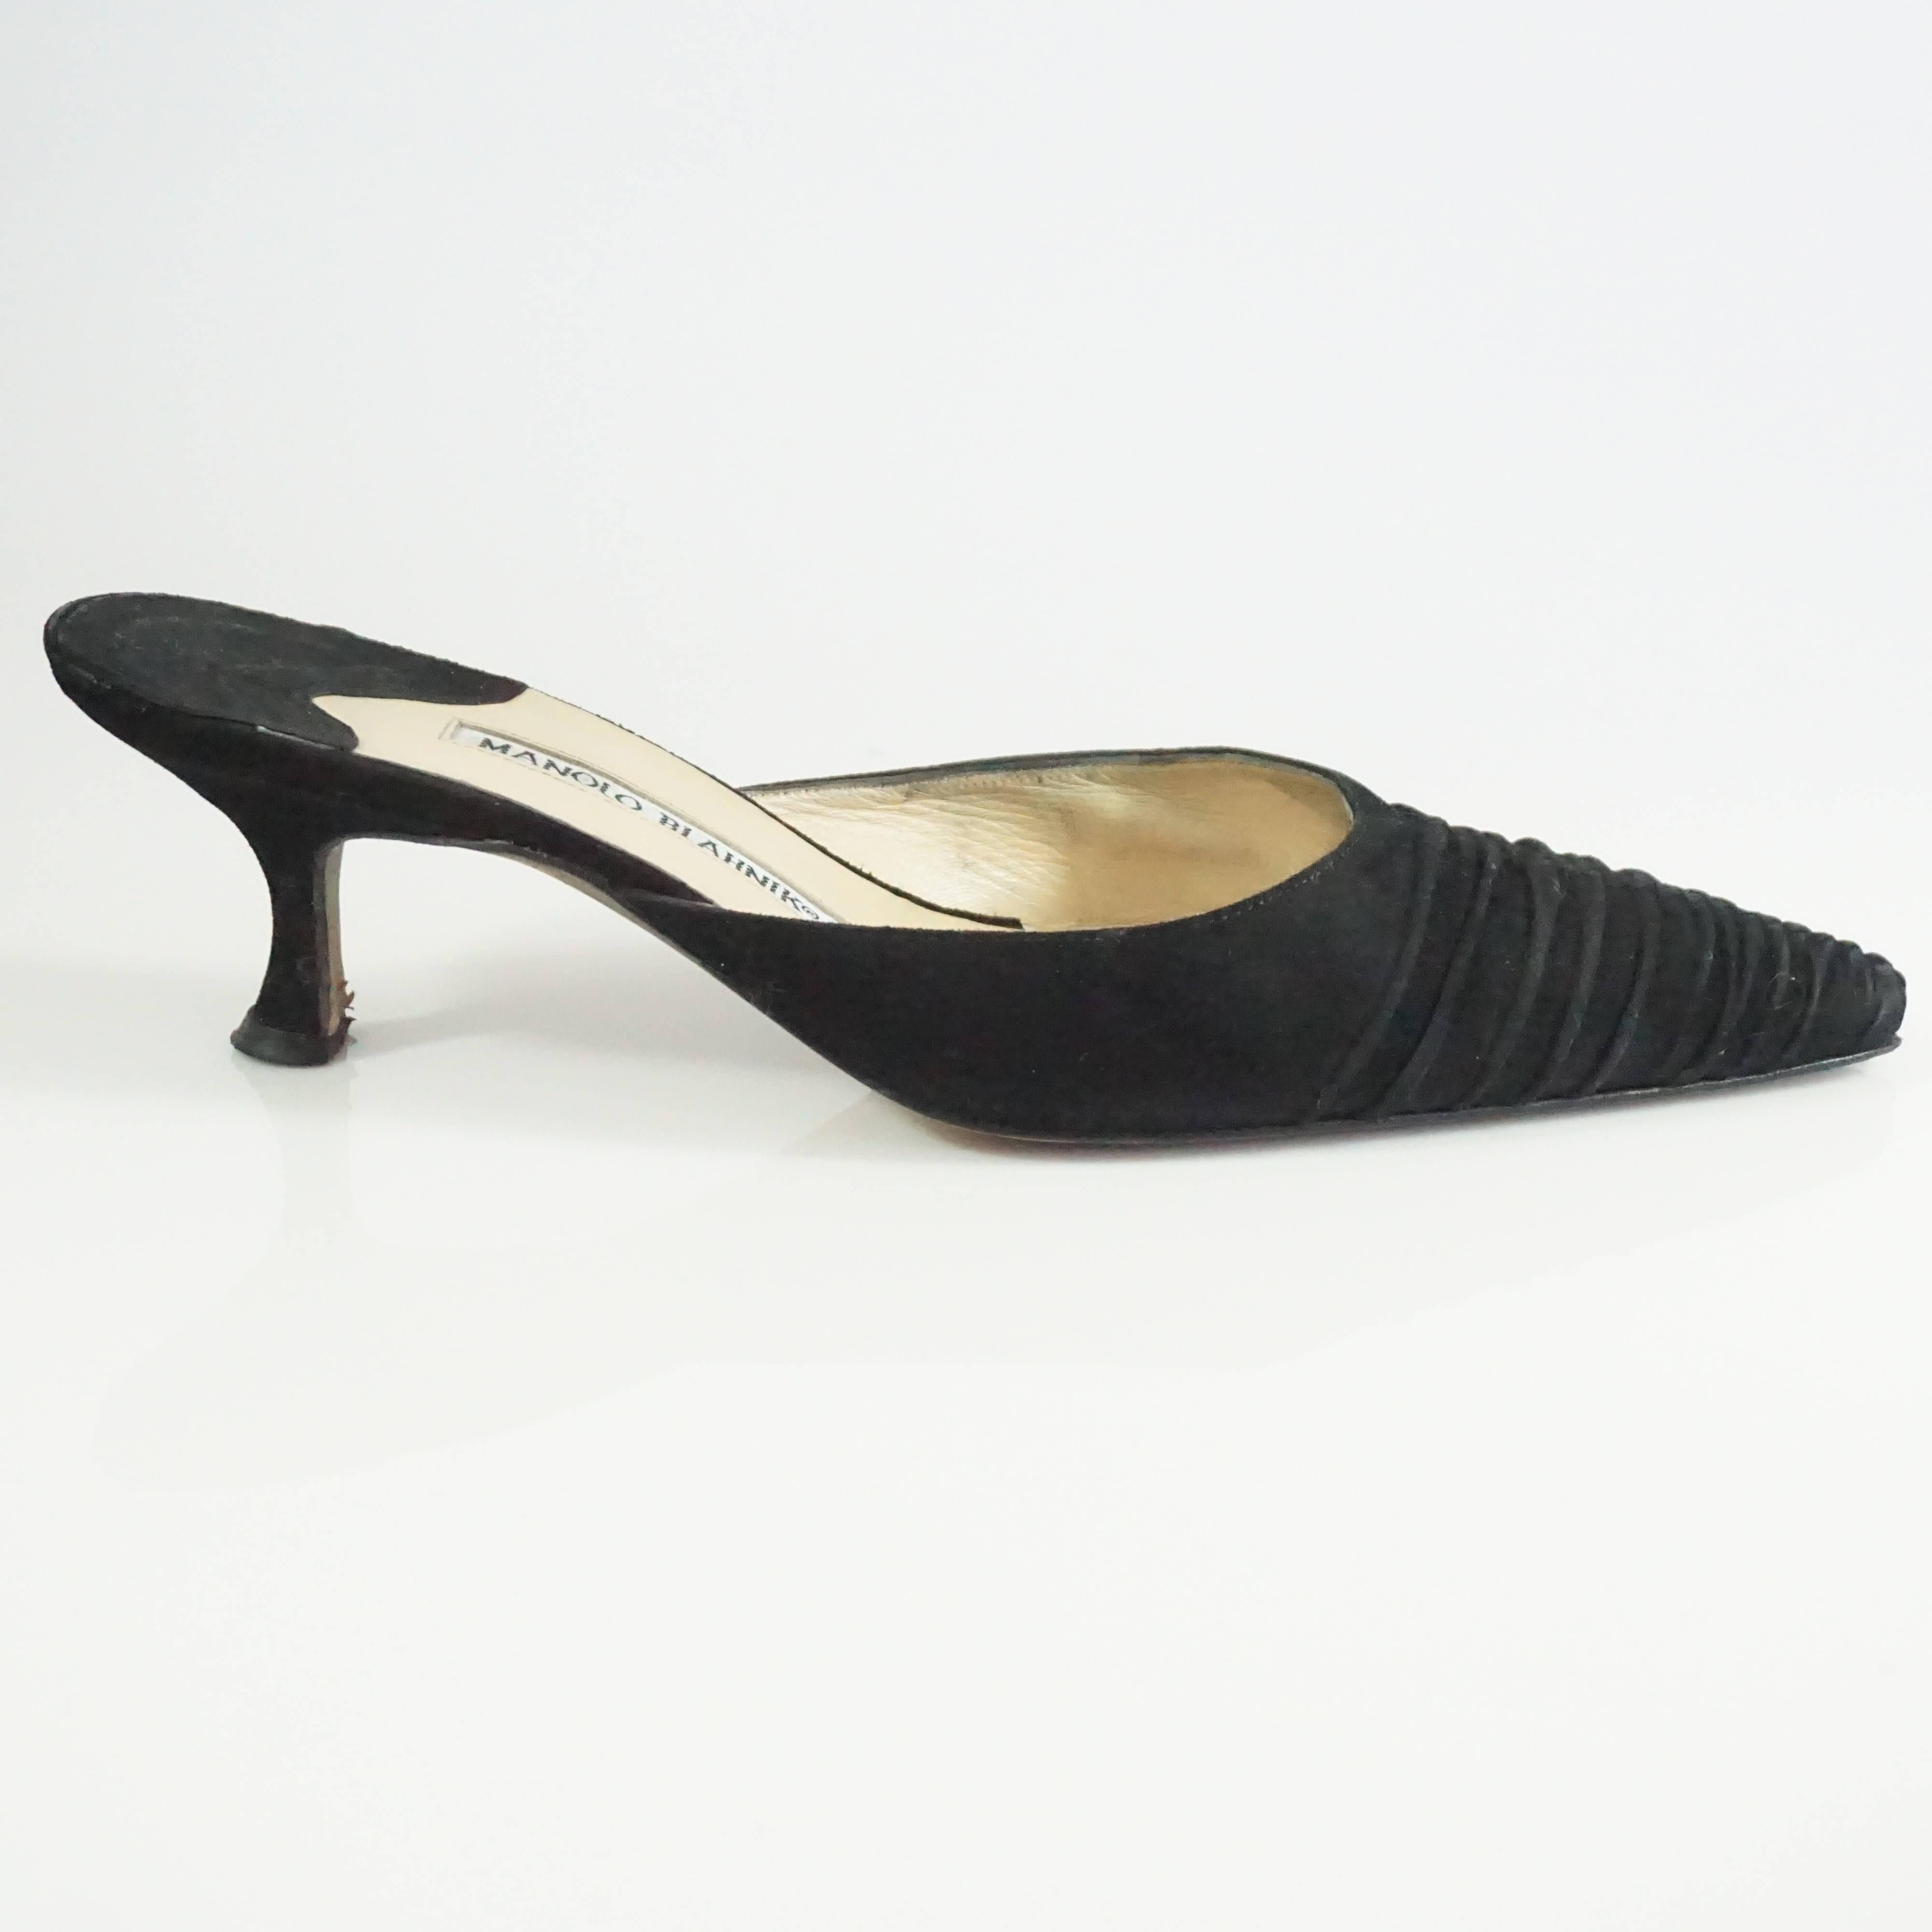 This Manolo Blahnik heel is a slide mule made of ruched black suede. The shoes are in fair condition with some wear on the bottom and some interior markings. Size 38.5.

Heel Height: 2"